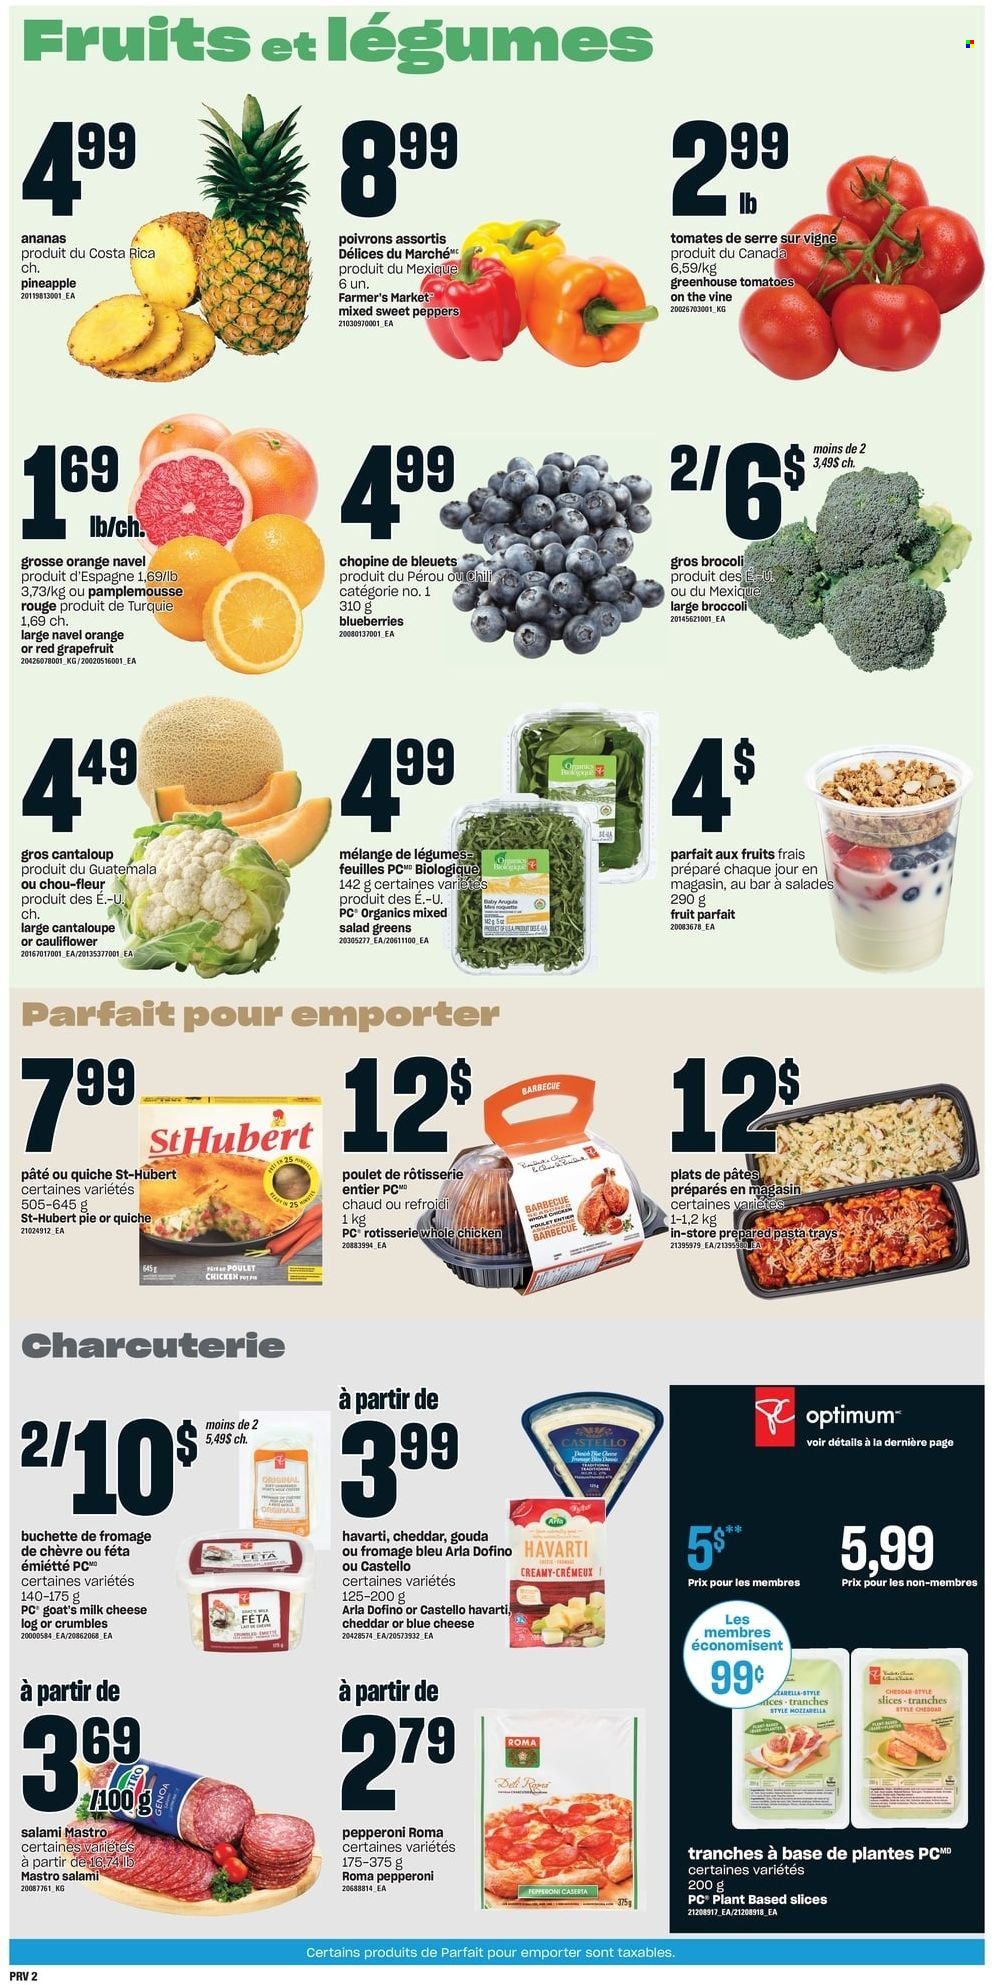 thumbnail - Provigo Flyer - January 13, 2022 - January 19, 2022 - Sales products - pie, broccoli, cantaloupe, cauliflower, sweet peppers, tomatoes, salad, peppers, blueberries, grapefruits, pineapple, navel oranges, pasta, salami, pepperoni, blue cheese, gouda, Havarti, cheddar, cheese, feta, Arla, milk, quiche, salad greens, oranges. Page 3.